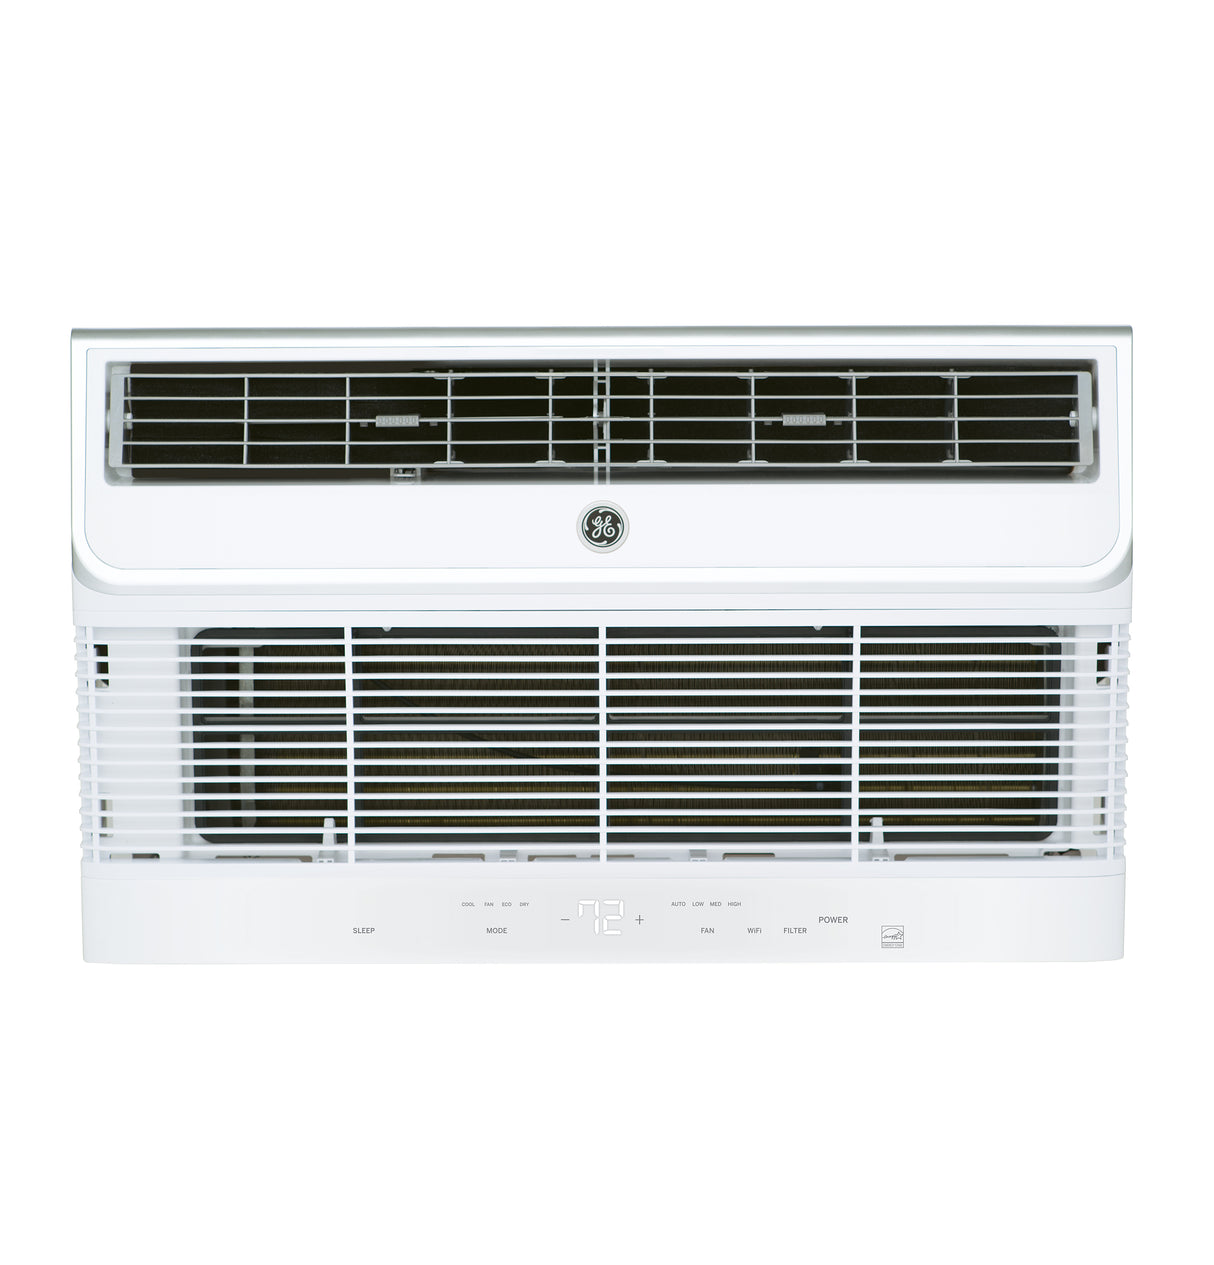 GE(R) ENERGY STAR(R) 230/208 Volt Built-In Cool-Only Room Air Conditioner - (AJCM10DWH)